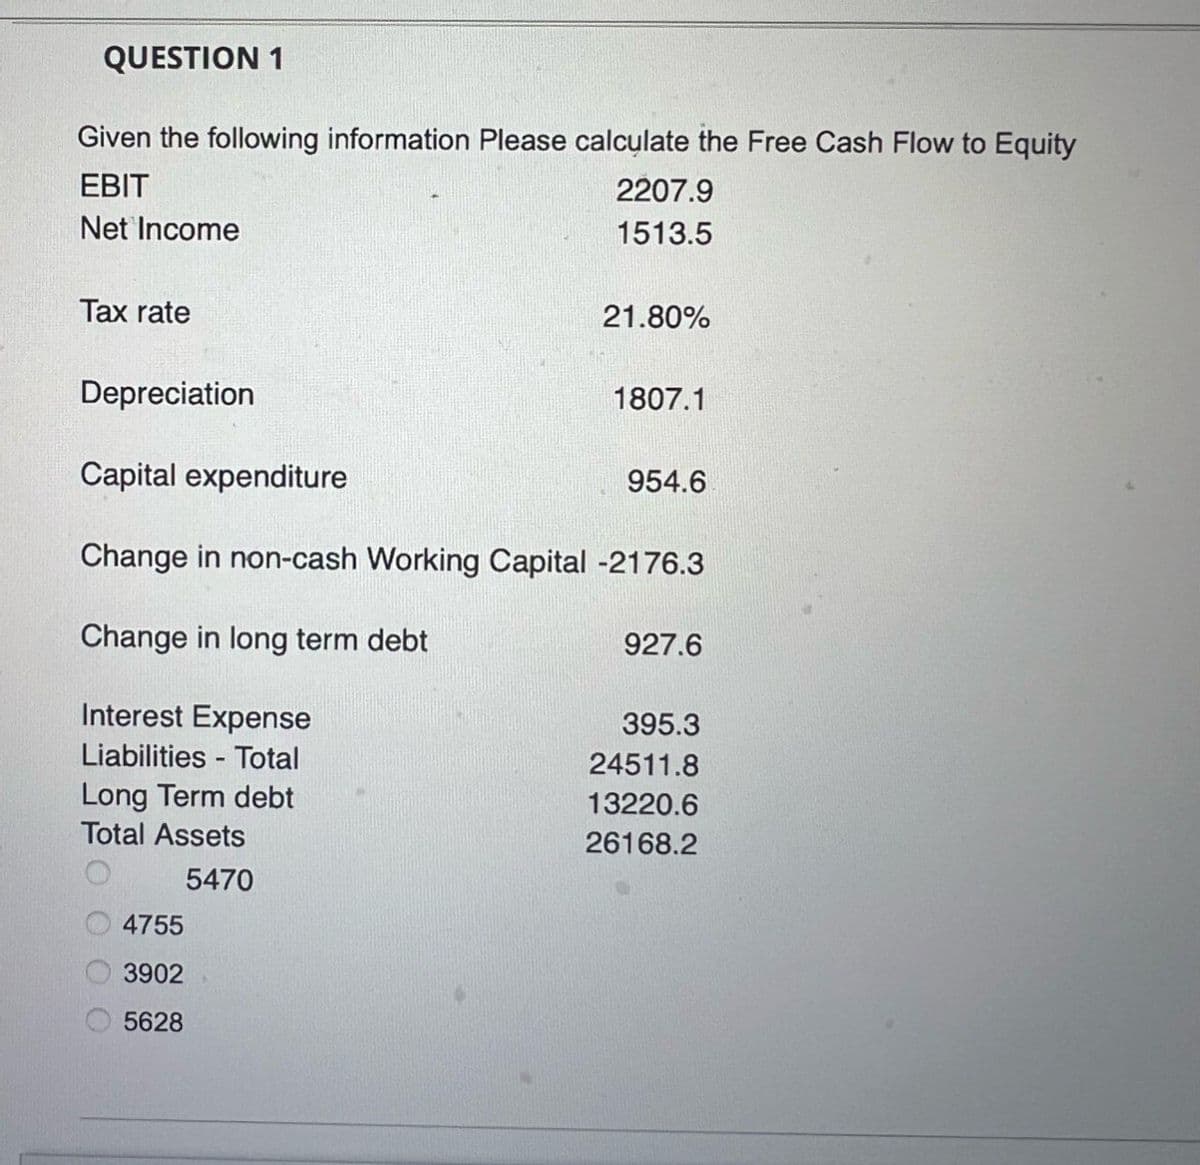 QUESTION 1
Given the following information Please calculate the Free Cash Flow to Equity
EBIT
Net Income
Tax rate
Depreciation
Capital expenditure
2207.9
1513.5
21.80%
1807.1
954.6
Change in non-cash Working Capital -2176.3
Change in long term debt
Interest Expense
Liabilities
Total
Long Term debt
Total Assets
4755
5470
3902
5628
927.6
395.3
24511.8
13220.6
26168.2